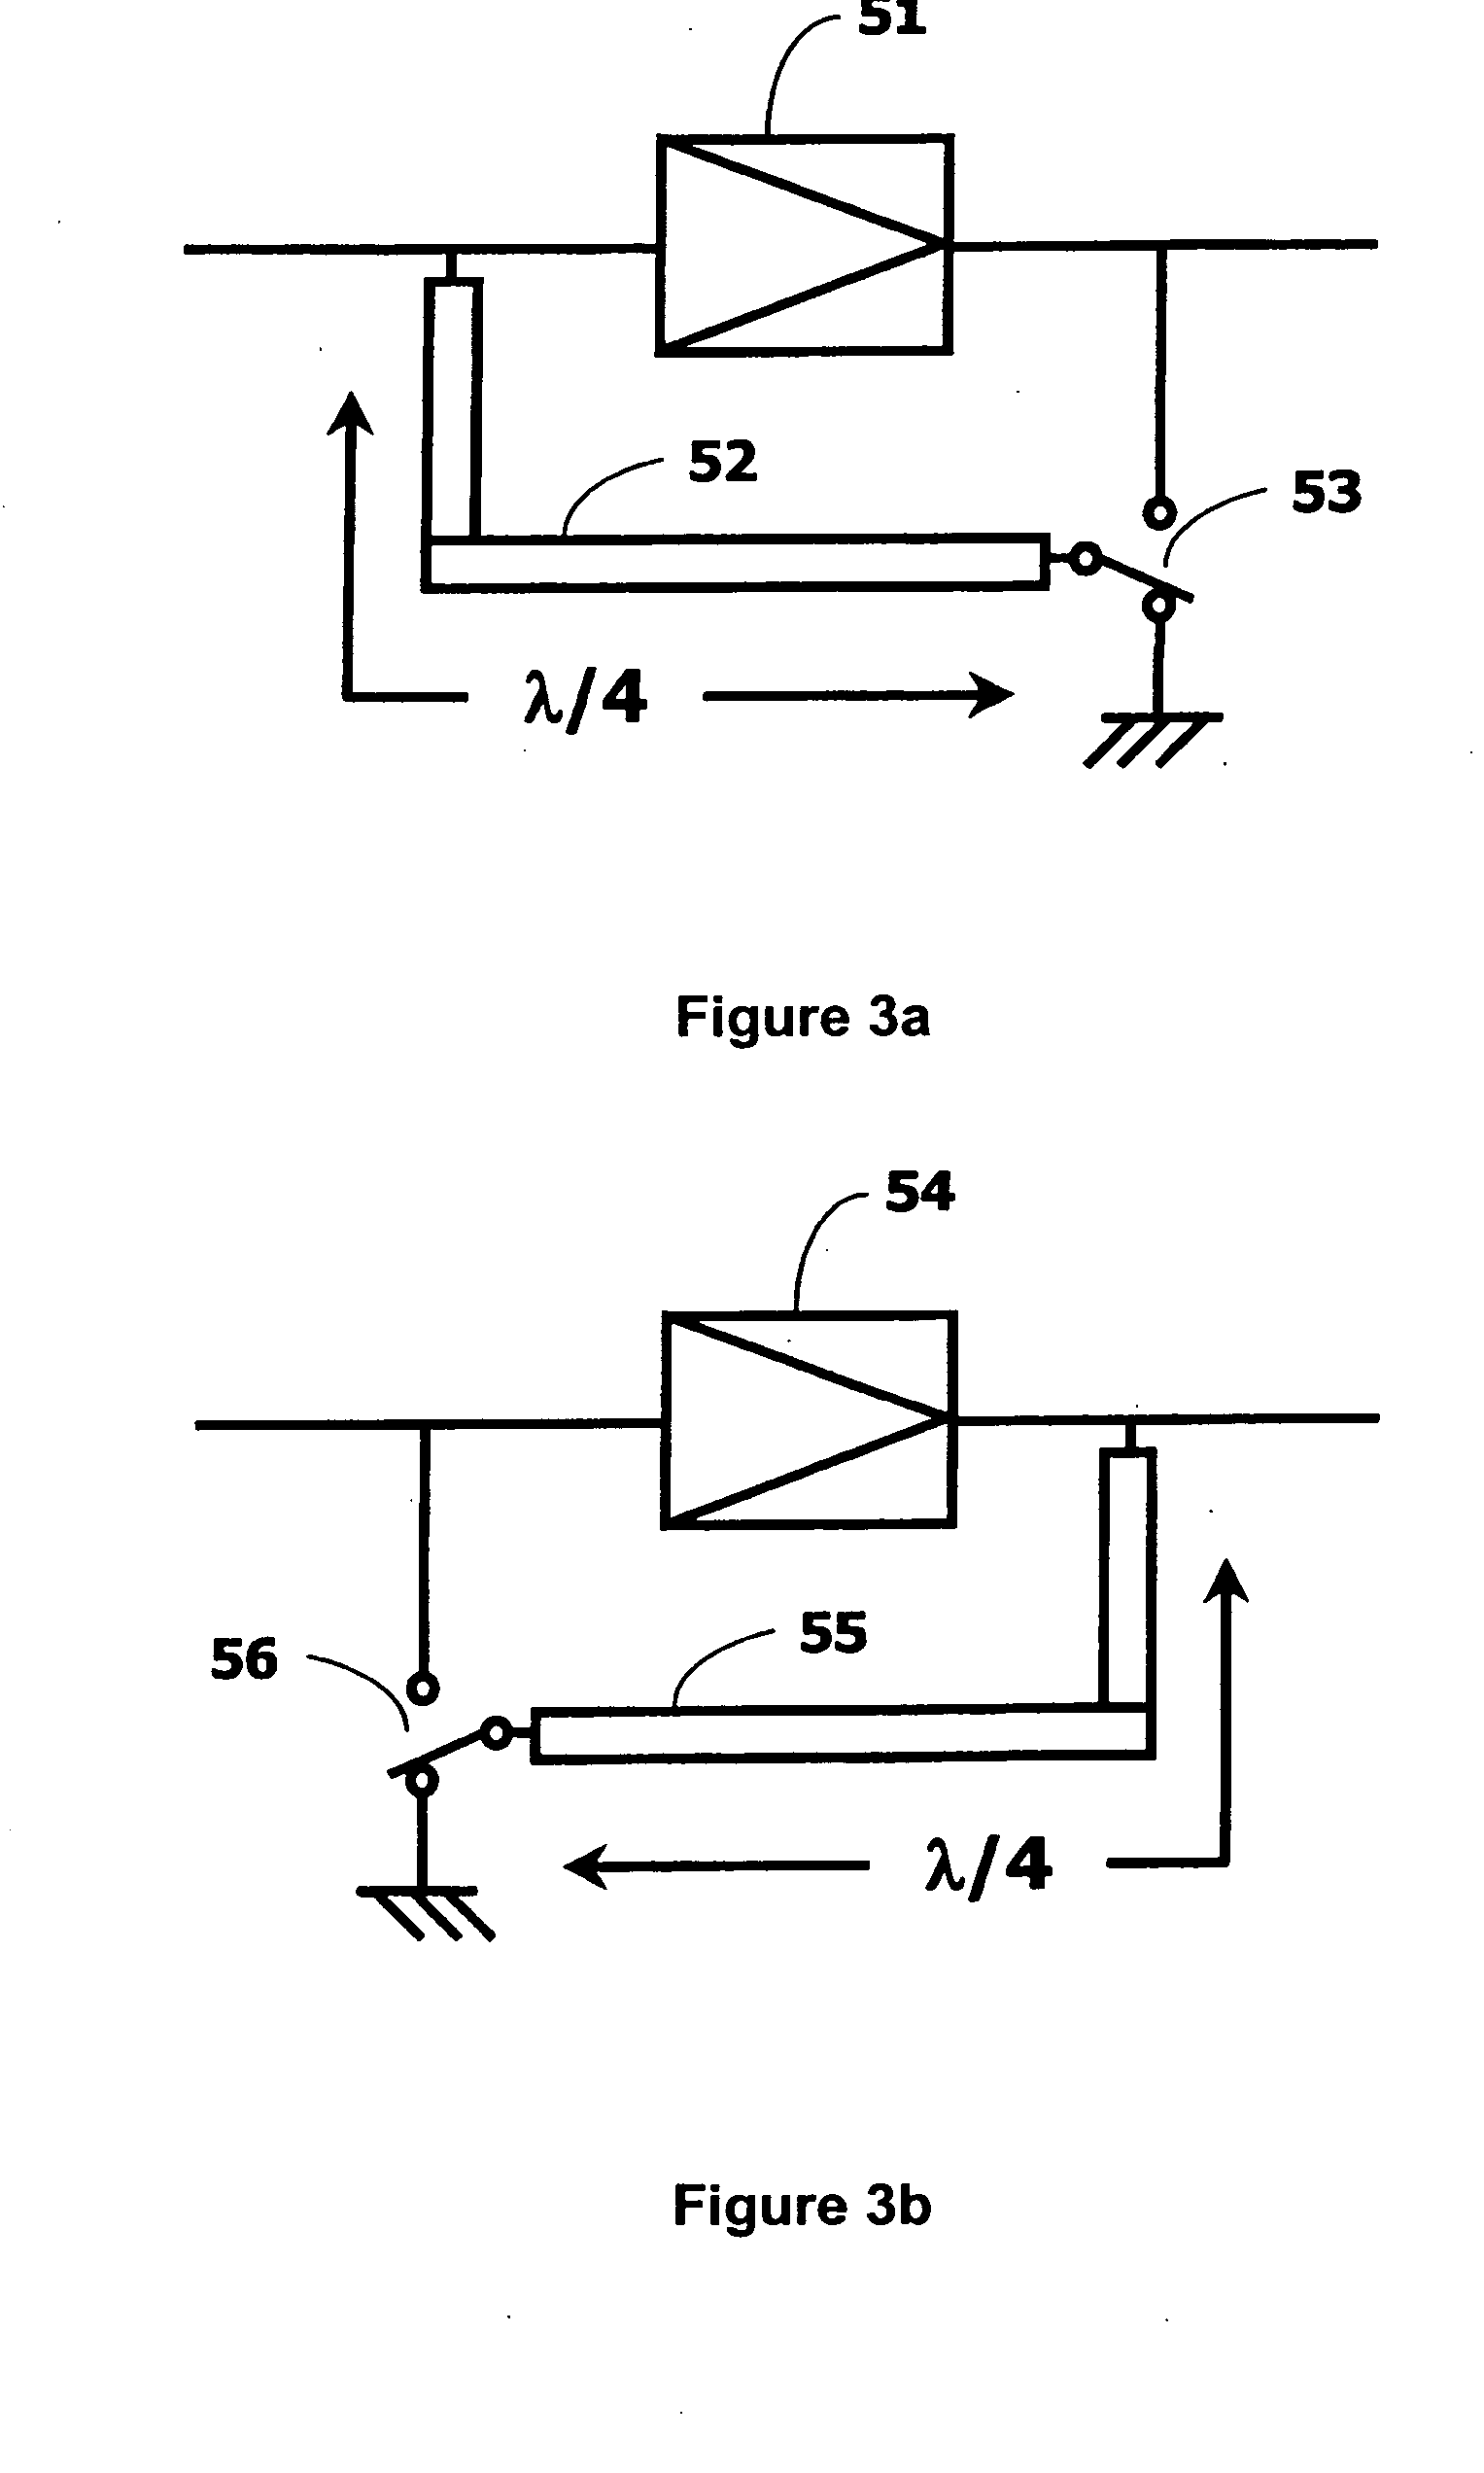 High efficiency power amplification apparatus with multiple power modes